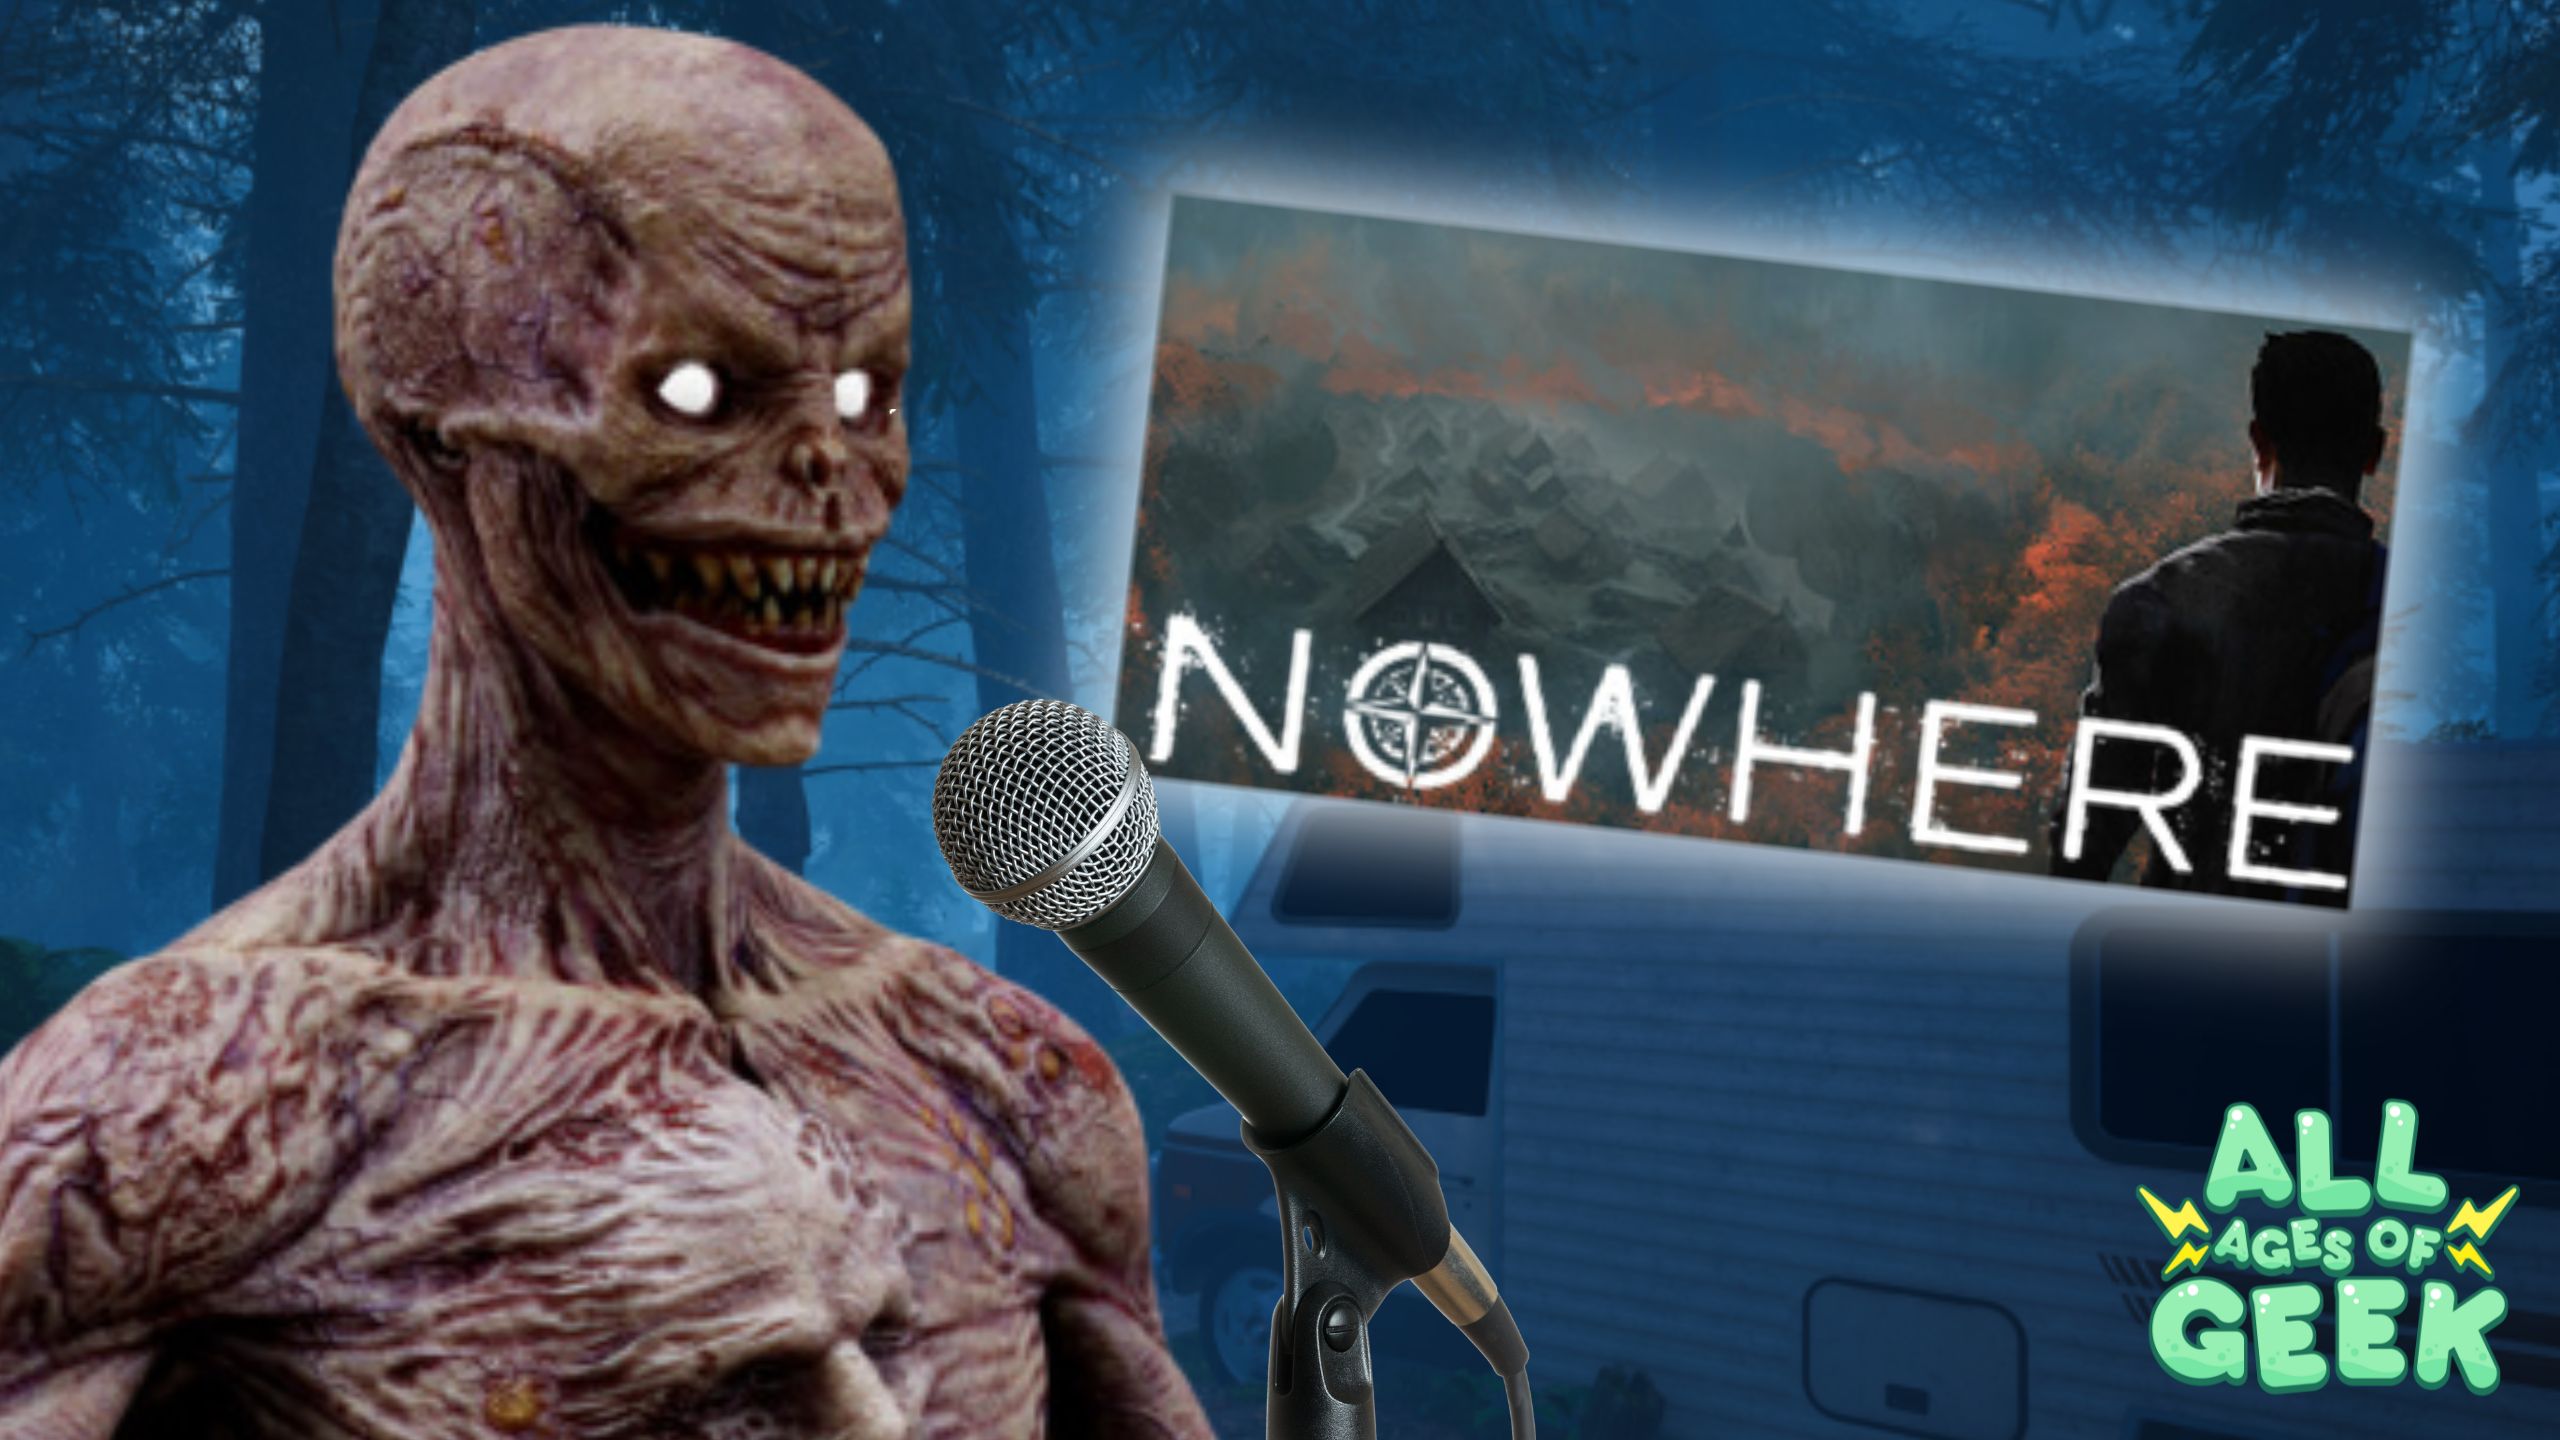 A creepy humanoid creature with decayed skin and glowing white eyes is holding a microphone. Behind it is a promotional image for a show or game titled "NOWHERE," featuring a man standing in front of a landscape with burning structures. The All Ages of Geek logo is present in the bottom right corner. The background suggests a forested area, creating an eerie atmosphere.